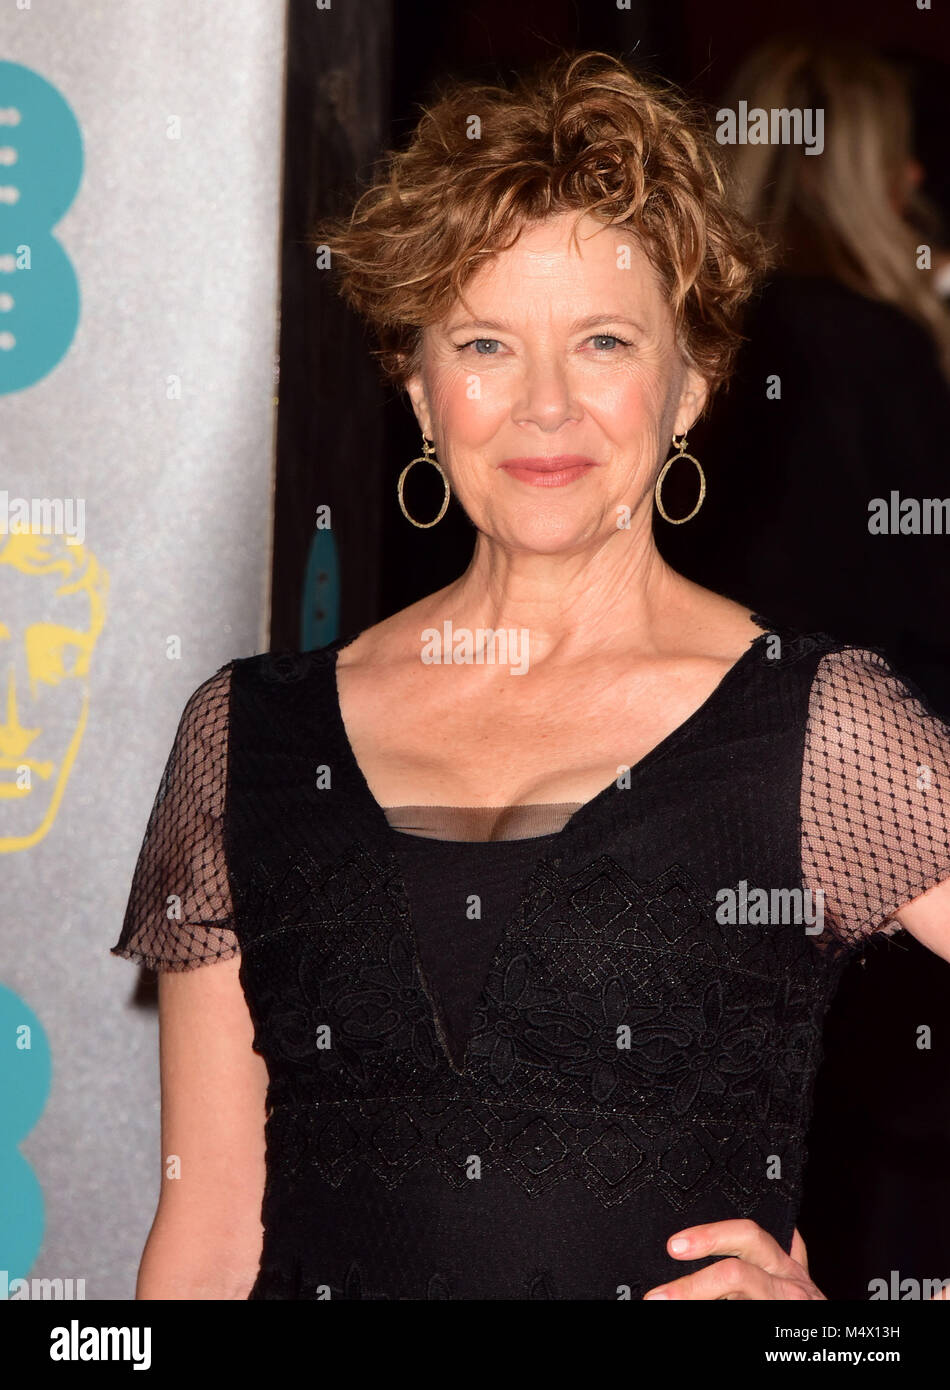 London, UK. 18th Feb, 2018. Celie Imrie   attending The EE British Academy Film Awards, at The Royal Albert Hall London Sunday 18th February. Credit: Peter Phillips/Alamy Live News Stock Photo